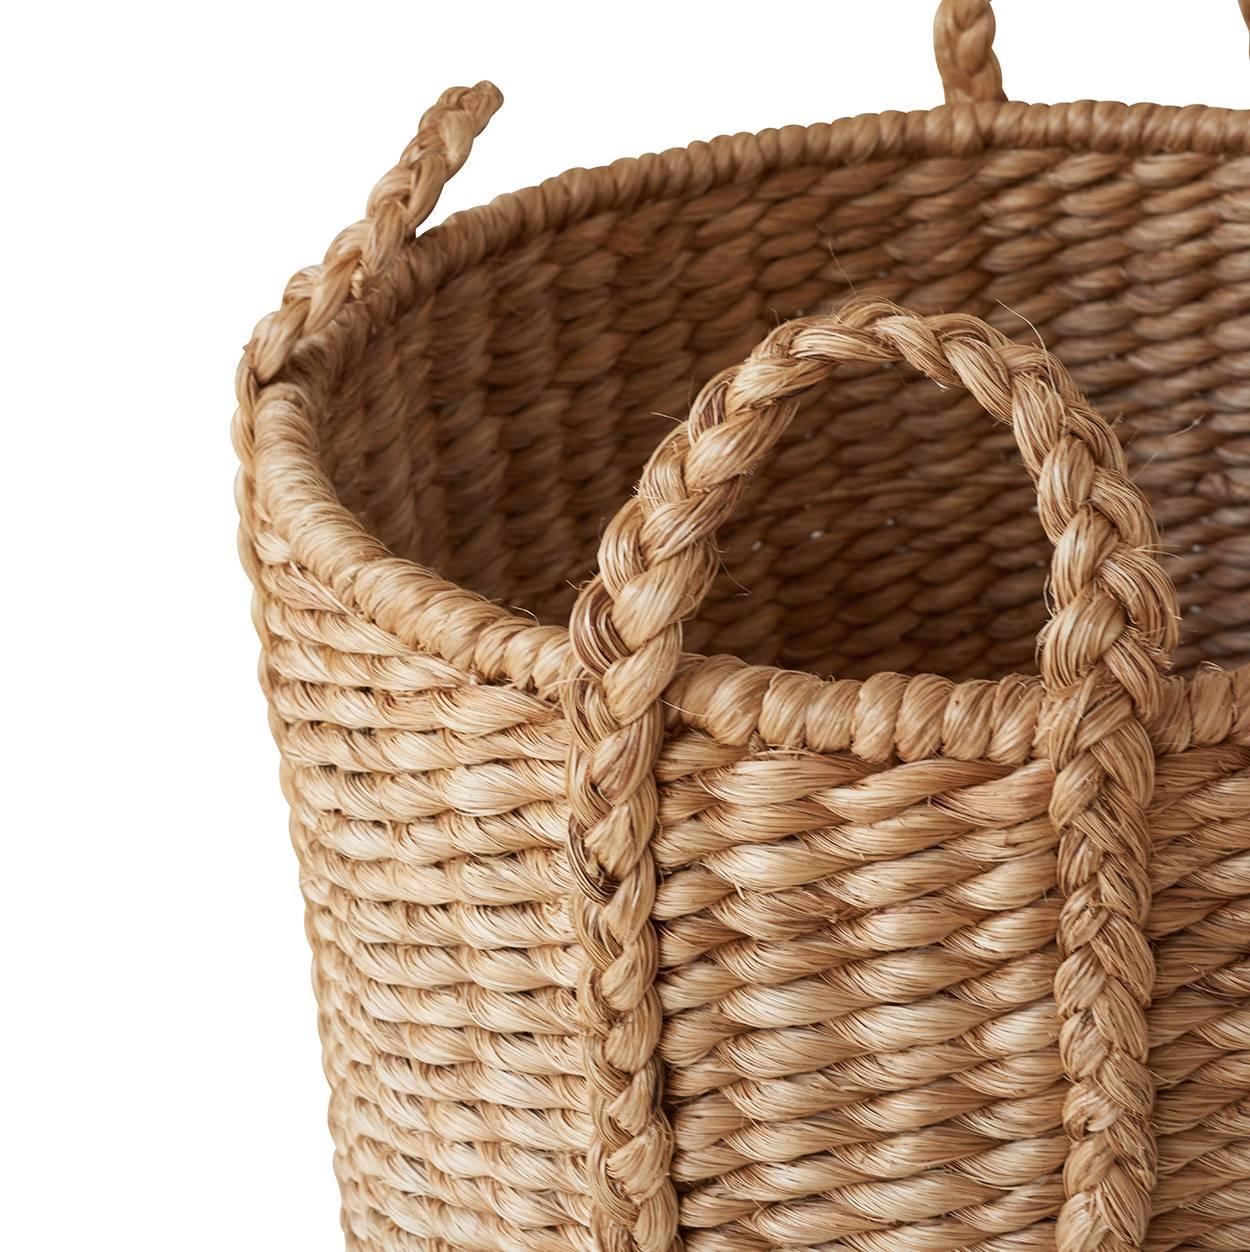 This elegant Philippines-imported Lubid Abaca basket is for both storage and style. Abacá, also known as Manila hemp, is very durable, flexible and resistant to salt water damage, originally allowing its use in hawsers, ship's lines and fishing